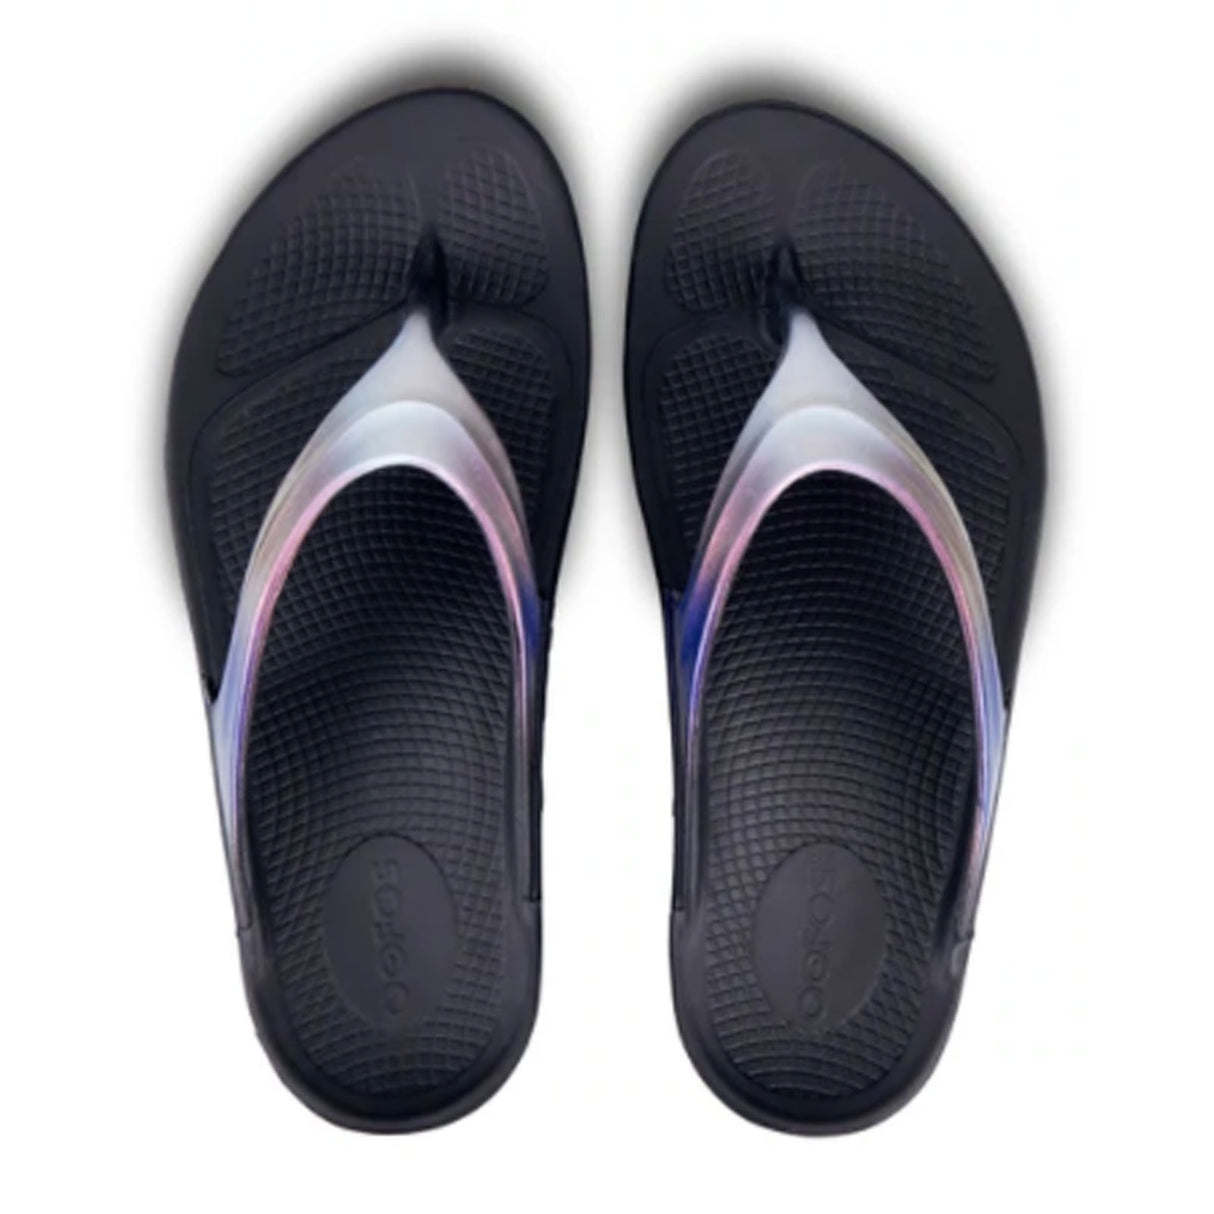 Oofos OOlala Luxe Sandal (Women) - Black/Calypso Sandals - Thong - The Heel Shoe Fitters